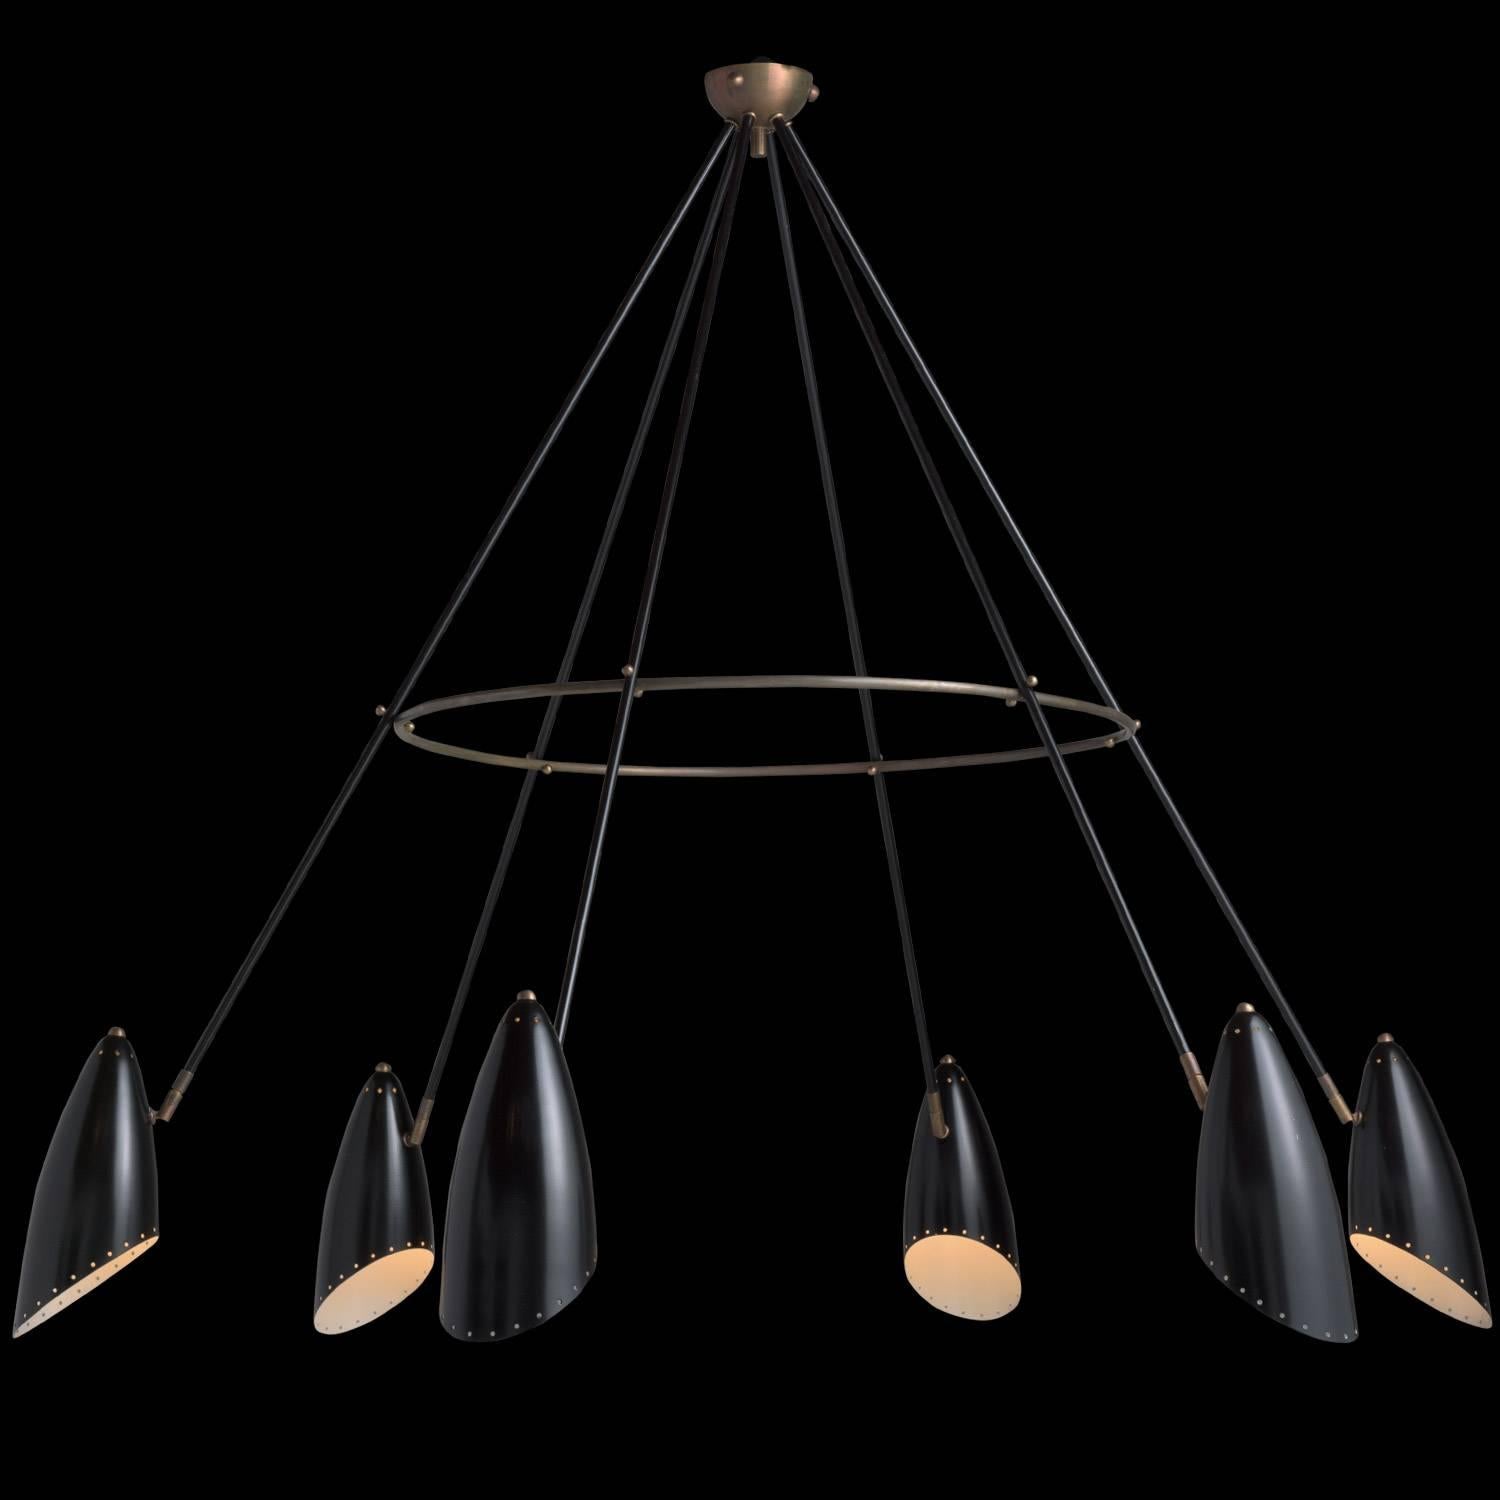 Black metal and brass modern chandelier, circa 1960.

Six-arm chandelier with pivoting shades and brass details.